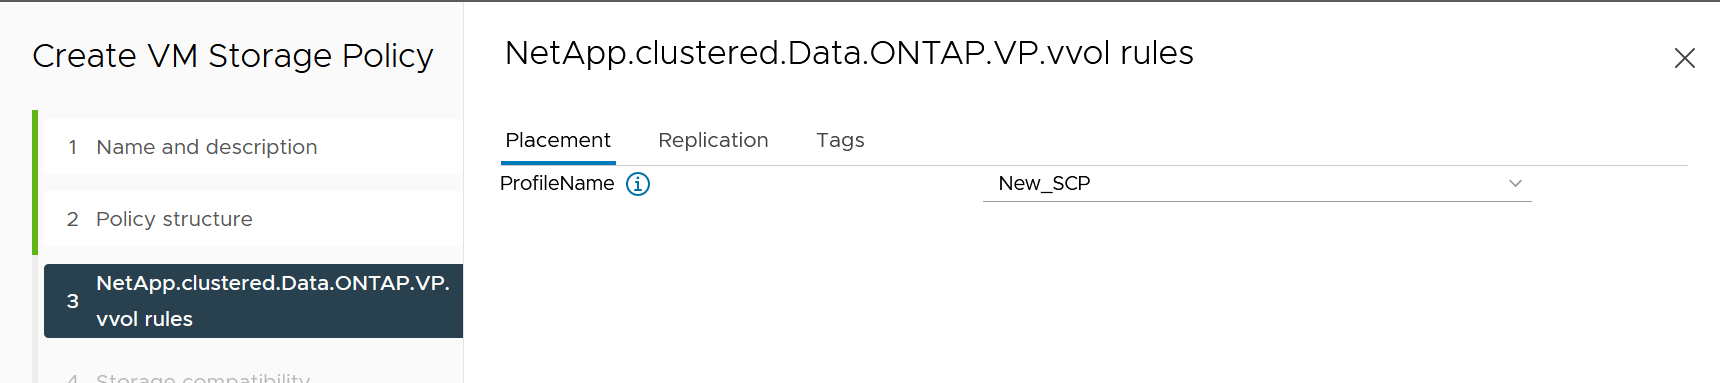 «VM Storage Policy Creation with ONTAP tools VASA Provider 9,10»,300